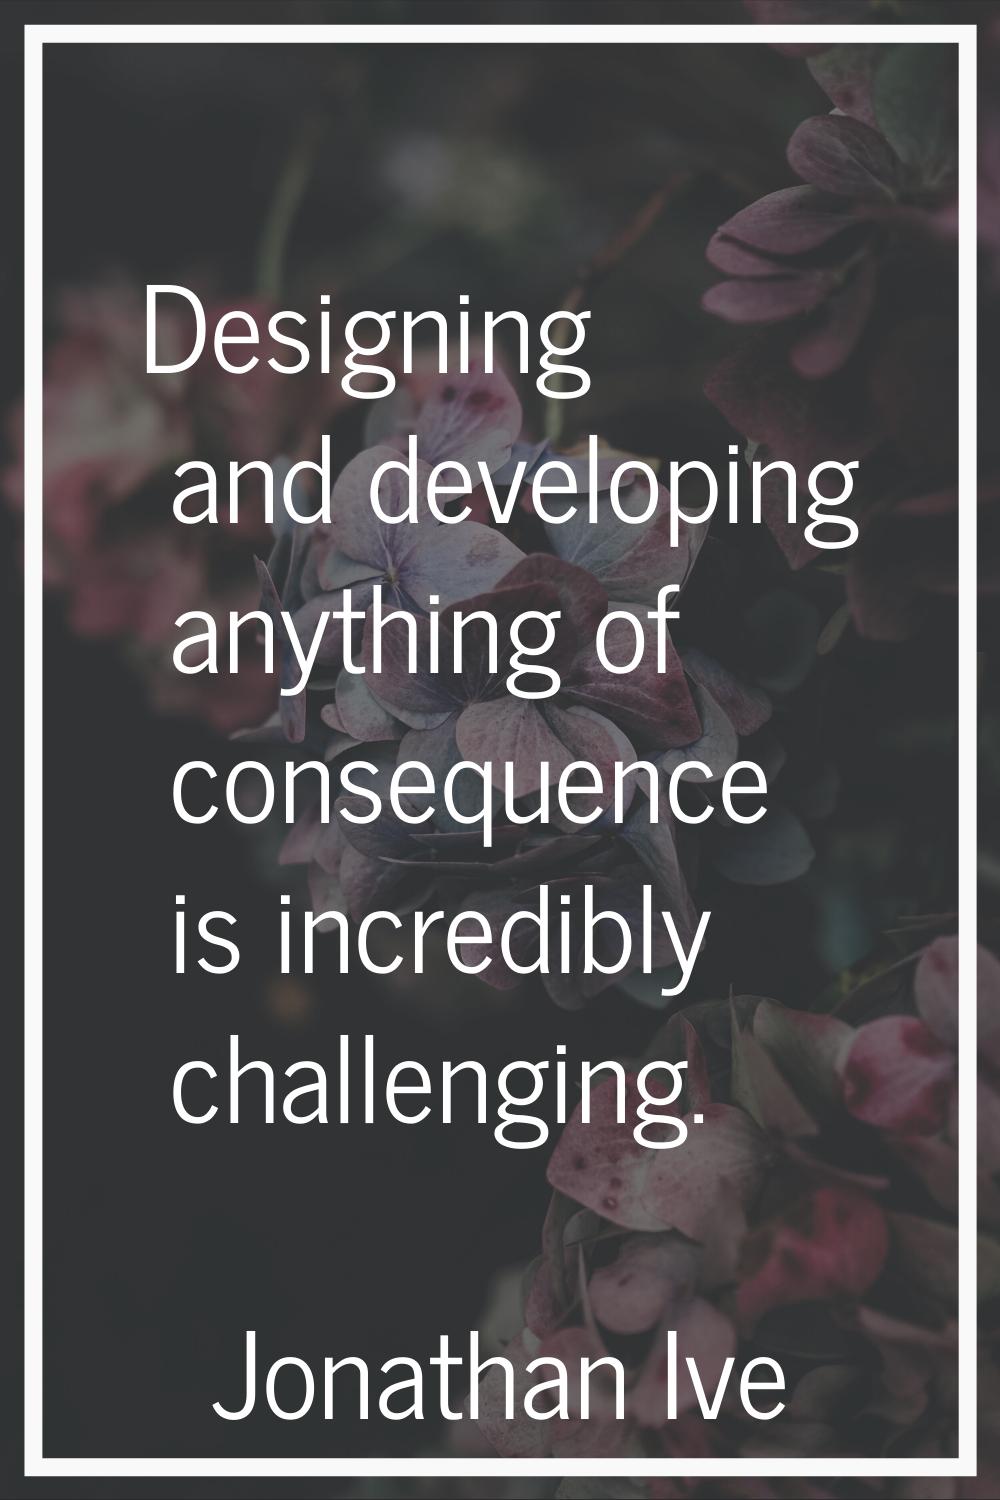 Designing and developing anything of consequence is incredibly challenging.